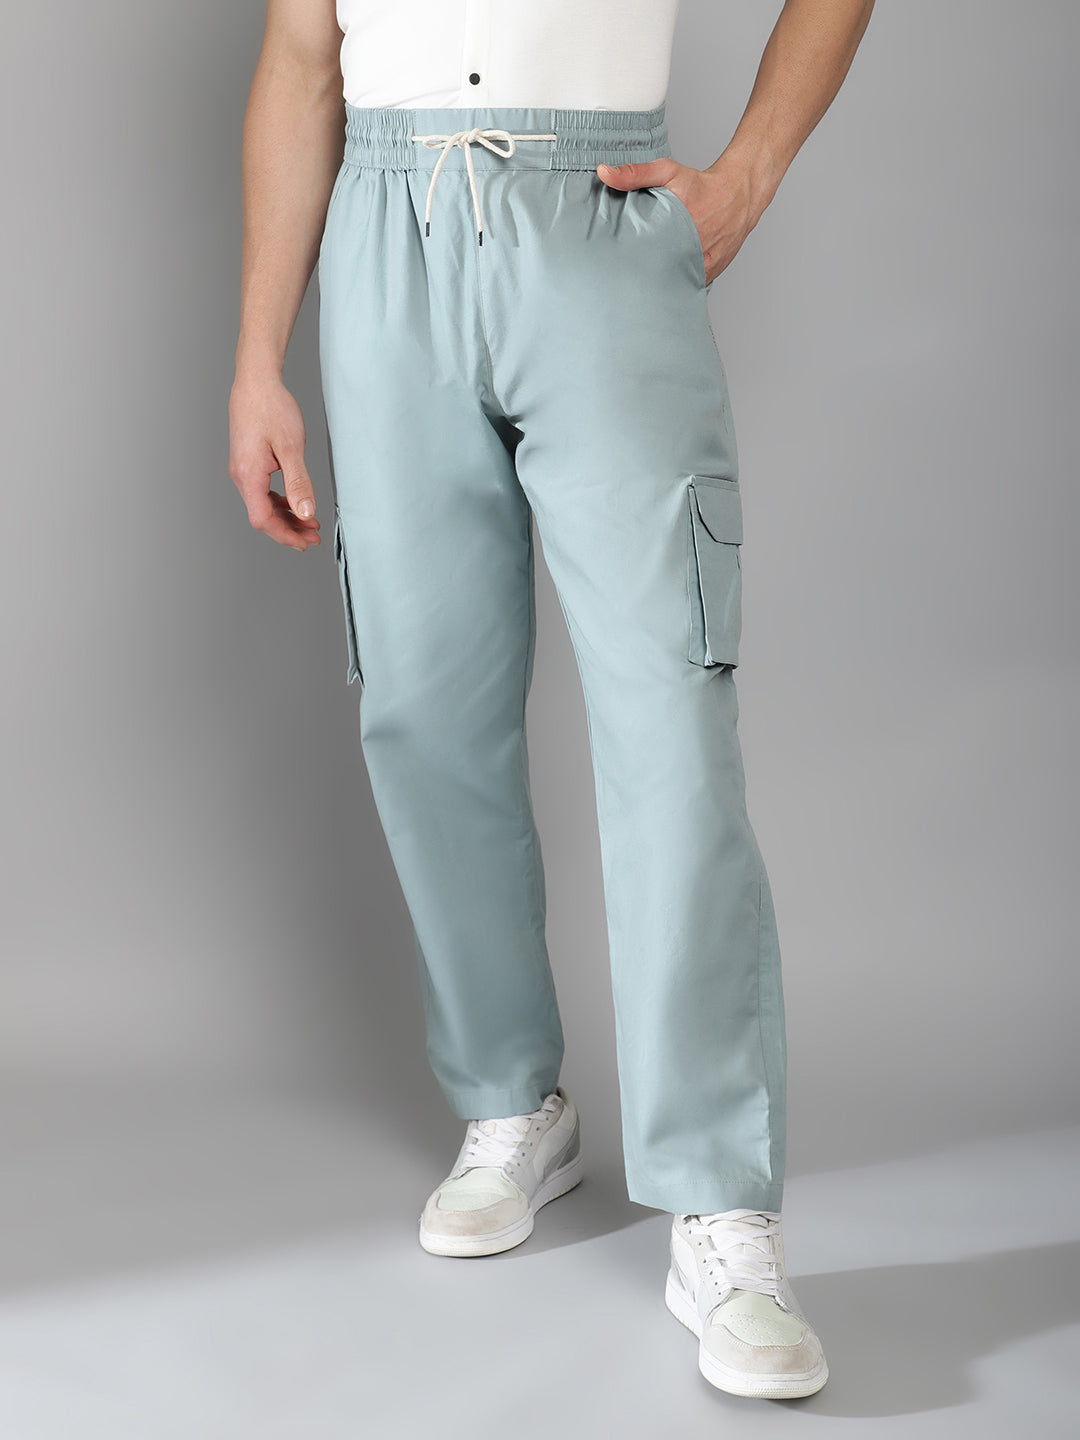 Forest Green Cargo Baggy Pant - Comfy Pant